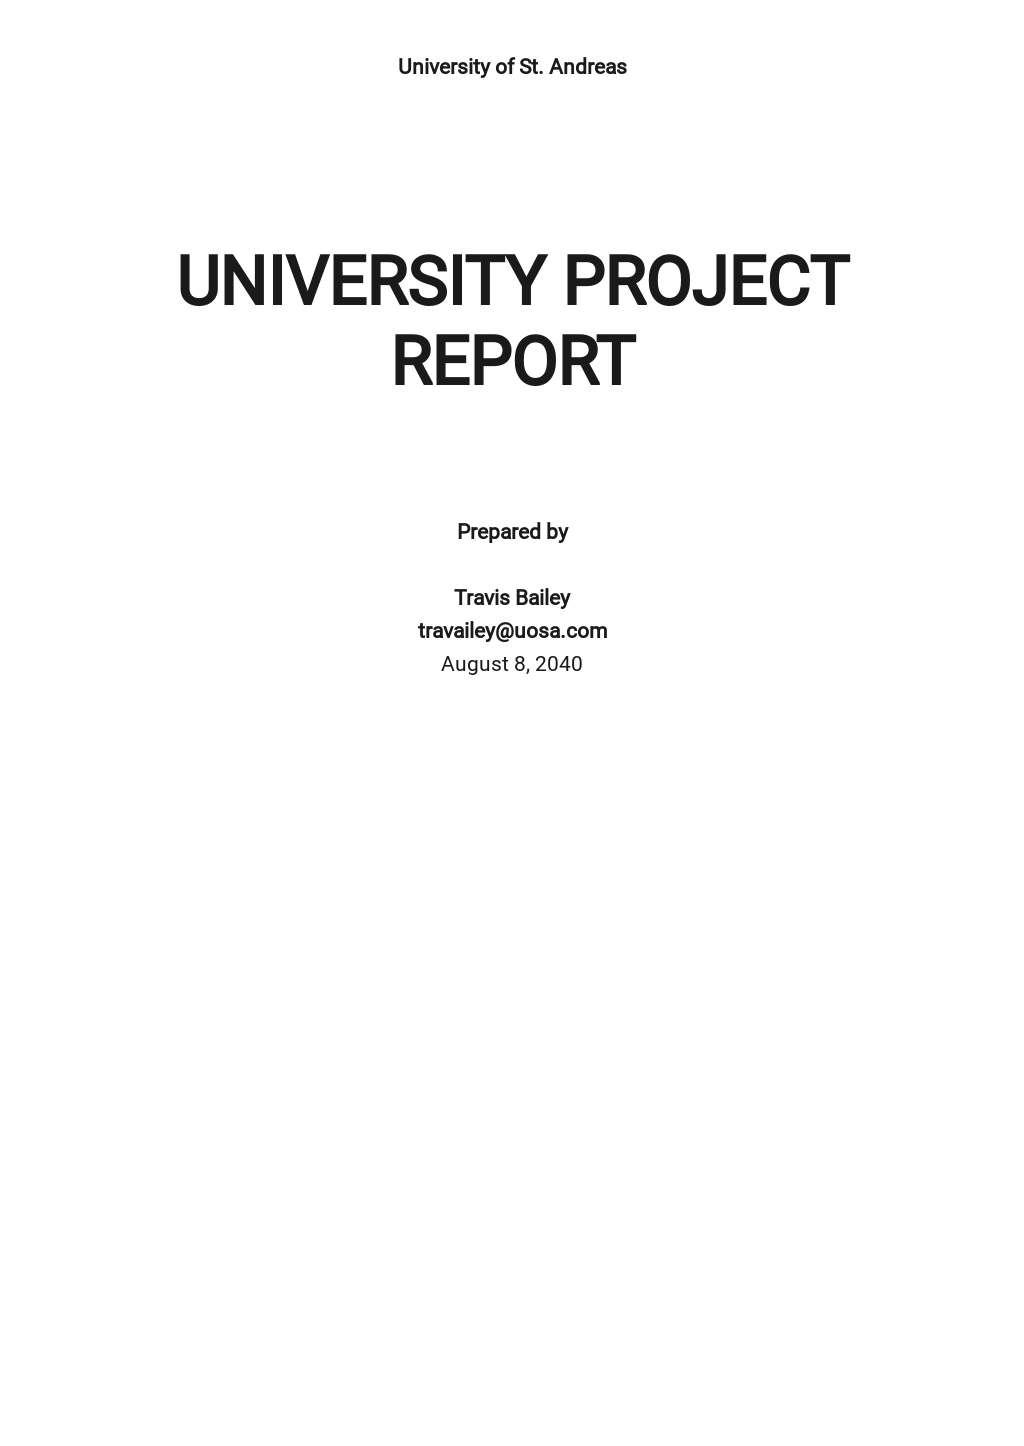 online education system project report download free